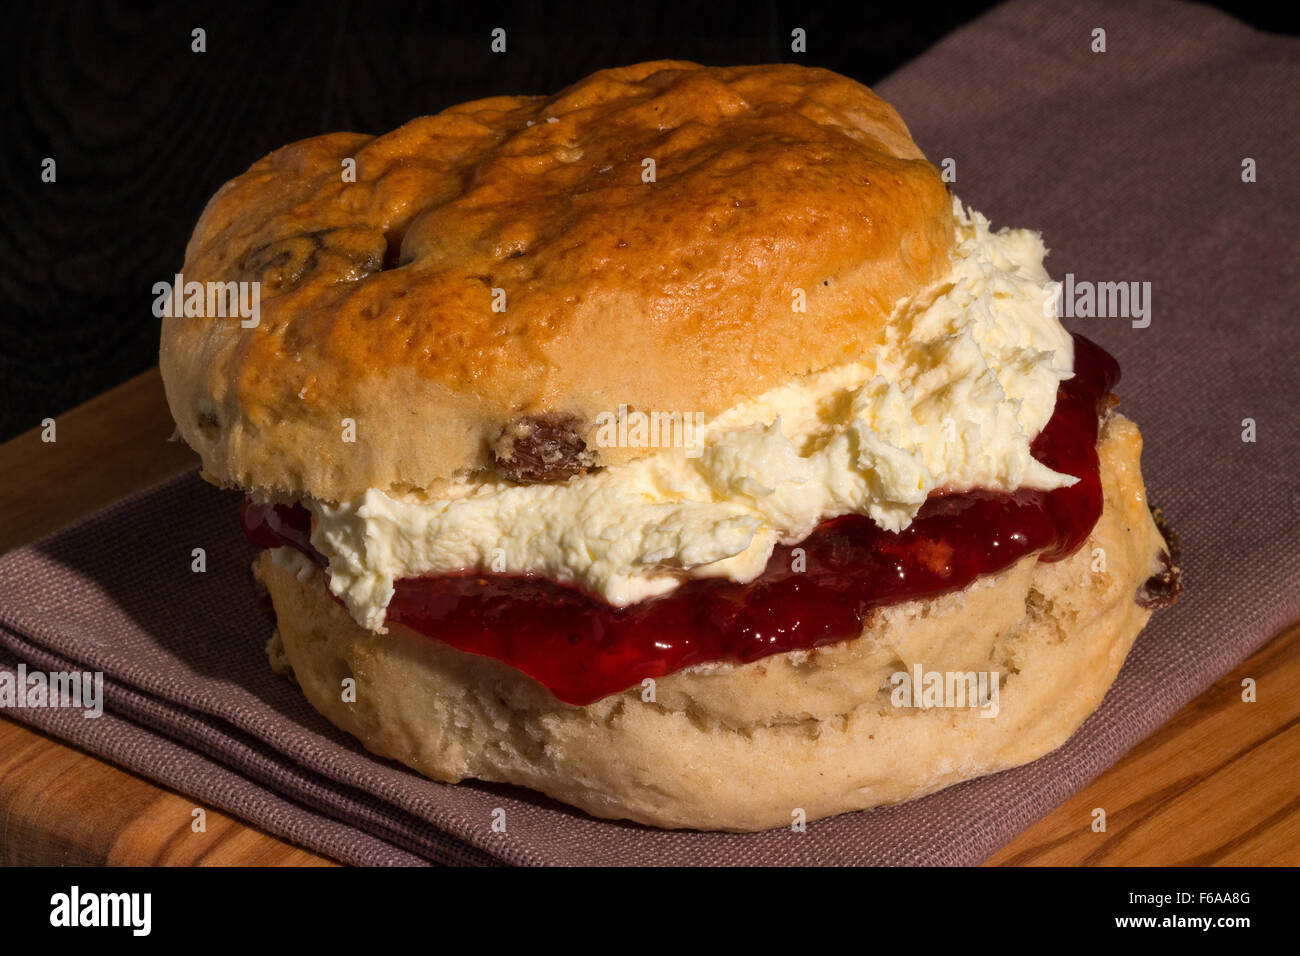 Freshly baked and served scone packed full of delicious strawberry jam and Cornish clotted cream Stock Photo